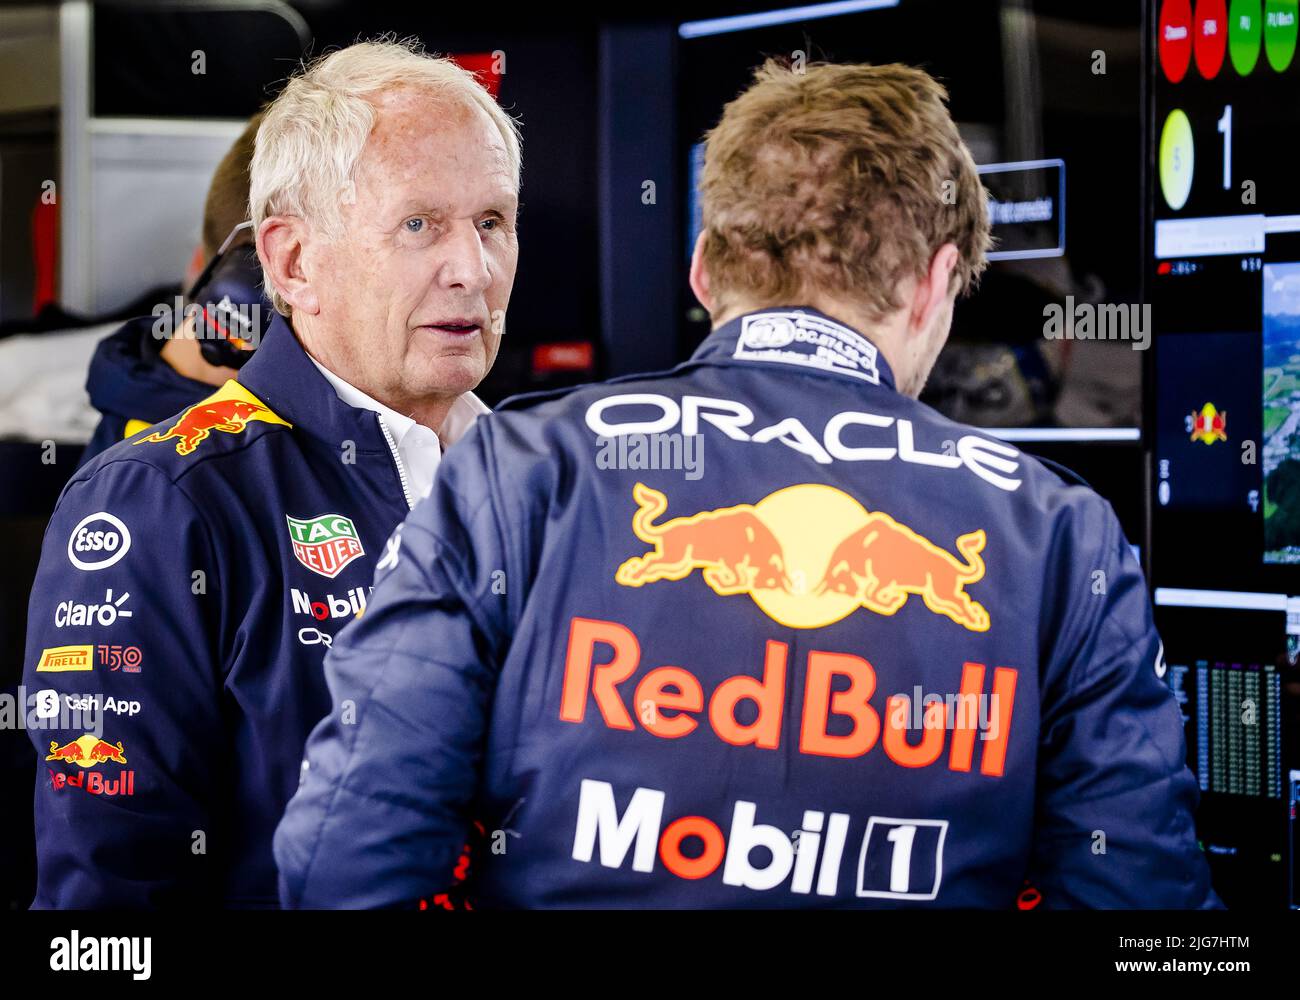 SPIELBERG - Helmut Marko and Max Verstappen (Red Bull) in the pit box after the 1st practice session ahead of the F1 Austrian Grand Prix at the Red Bull Ring on July 8, 2022 in Spielberg, Austria. ANP SEM VAN DER WAL Credit: ANP/Alamy Live News Stock Photo